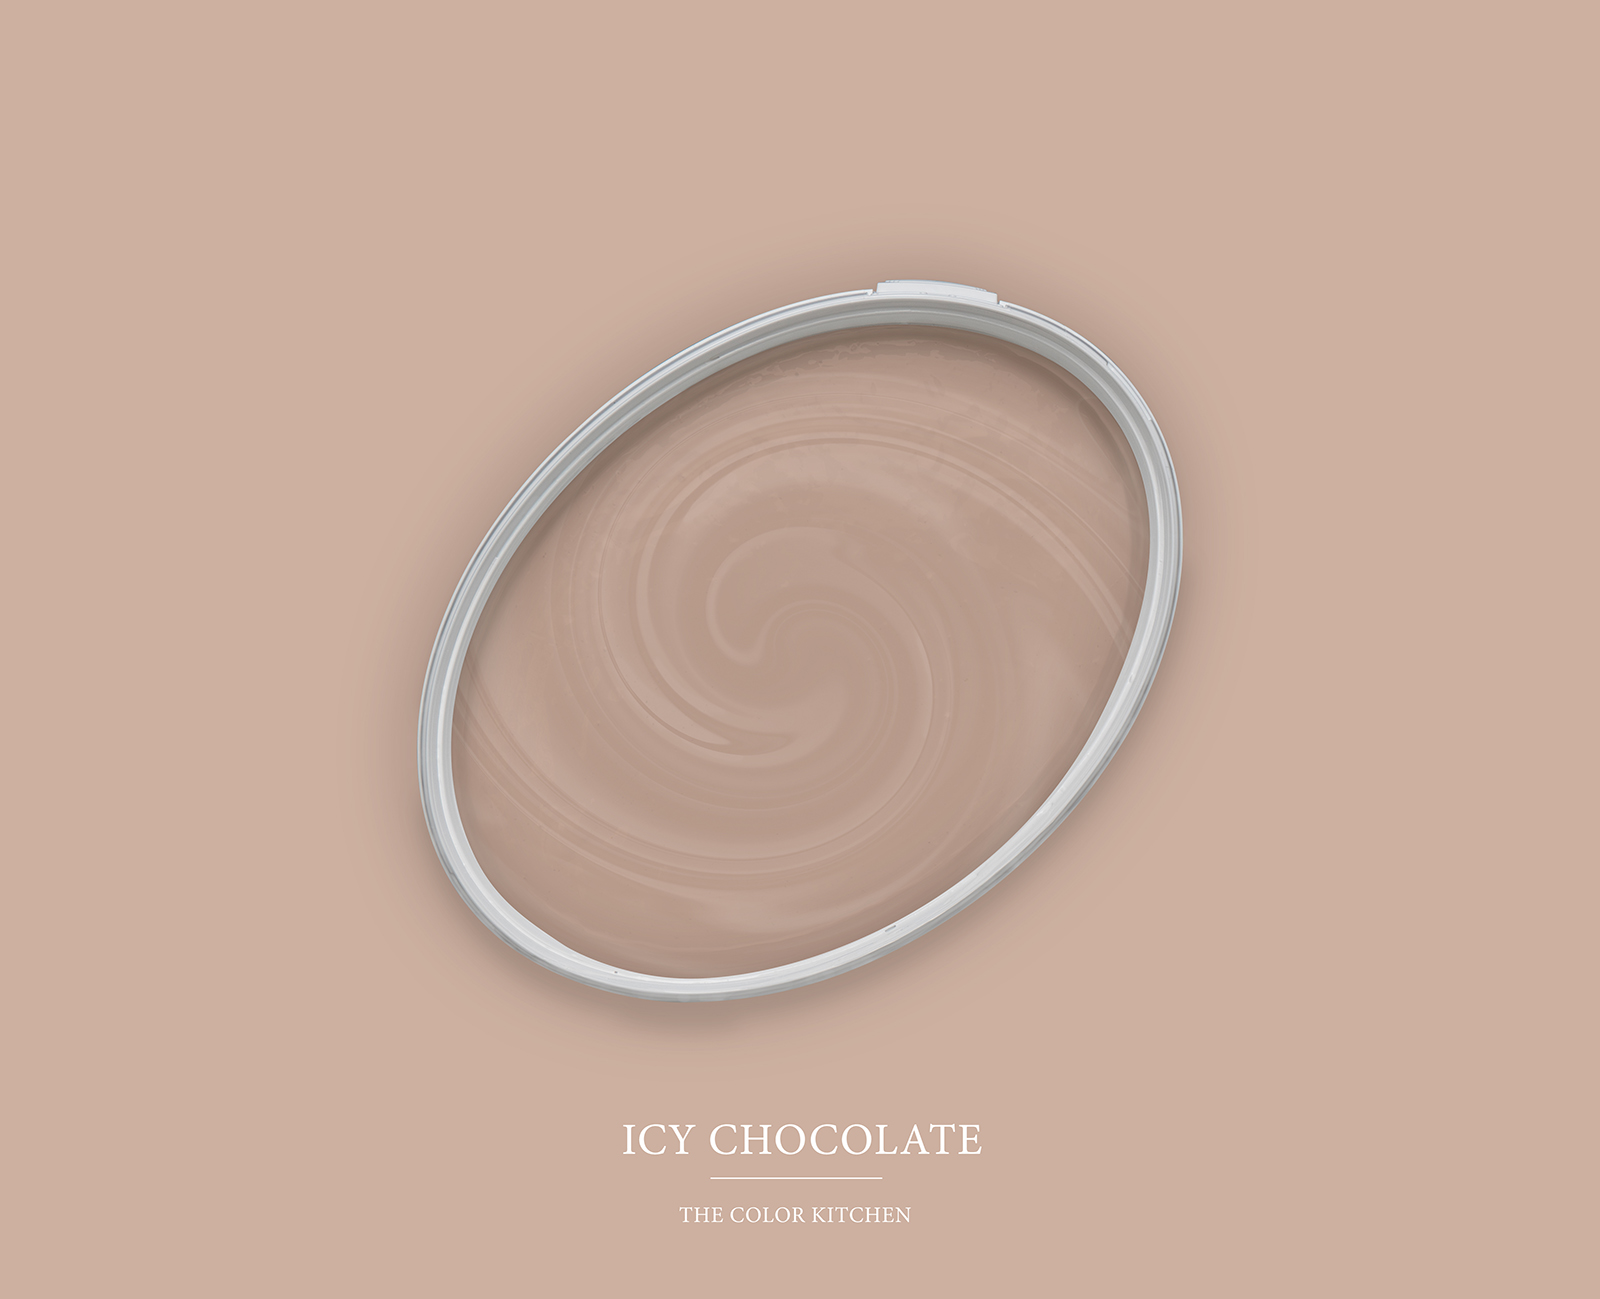         Wall Paint TCK7001 »Icy Chocolate« in delicate red-brown – 2.5 litre
    